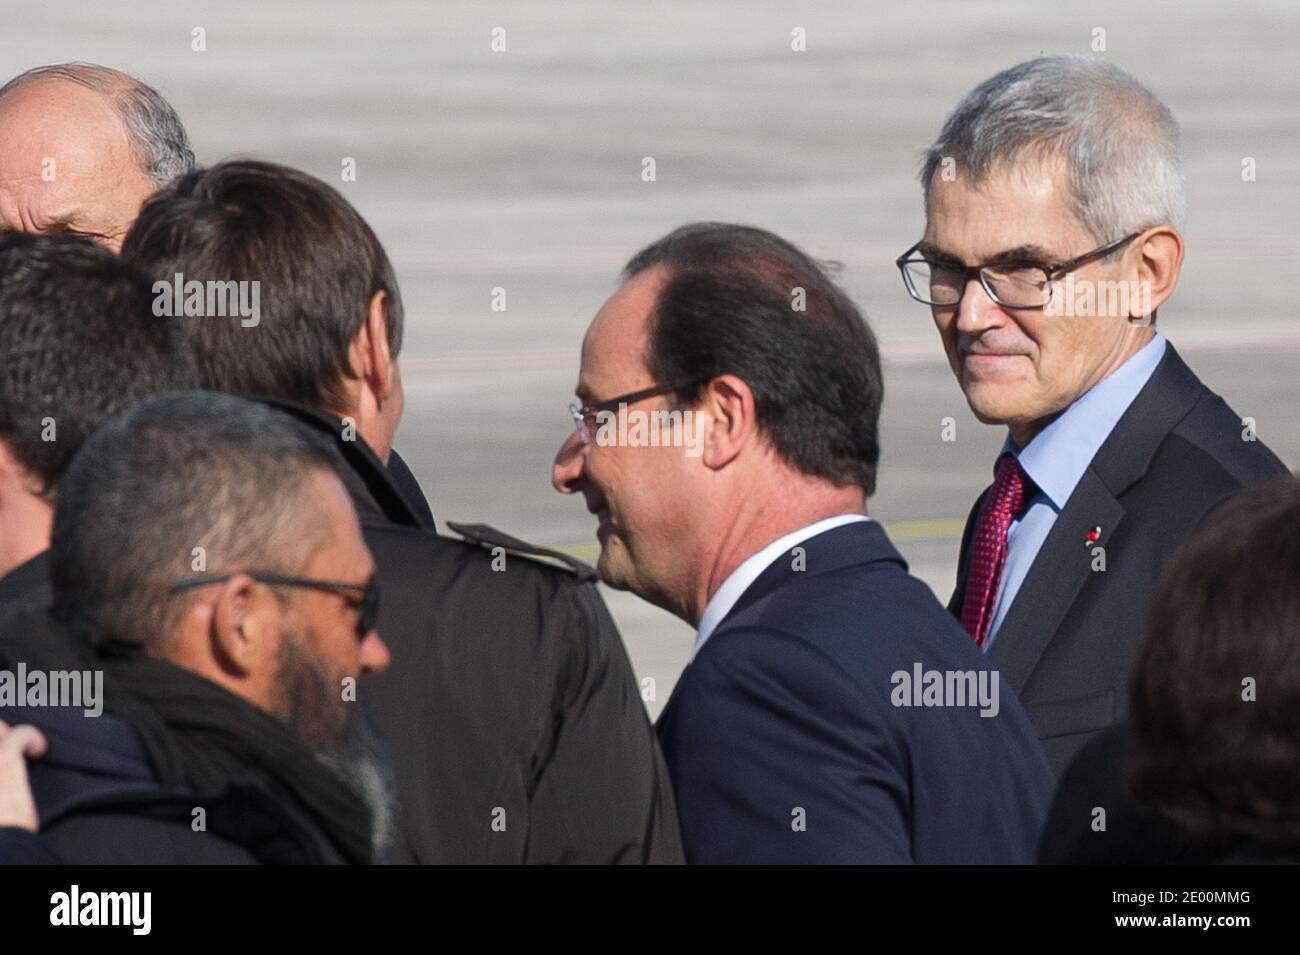 The four French hostages released yesterday in Niger are welcomed by French  President Francois Hollande and Jean-Michel Chereau, Protection Director  Areva, at Villacoublay military airport, near Paris, France on October 30,  2013.